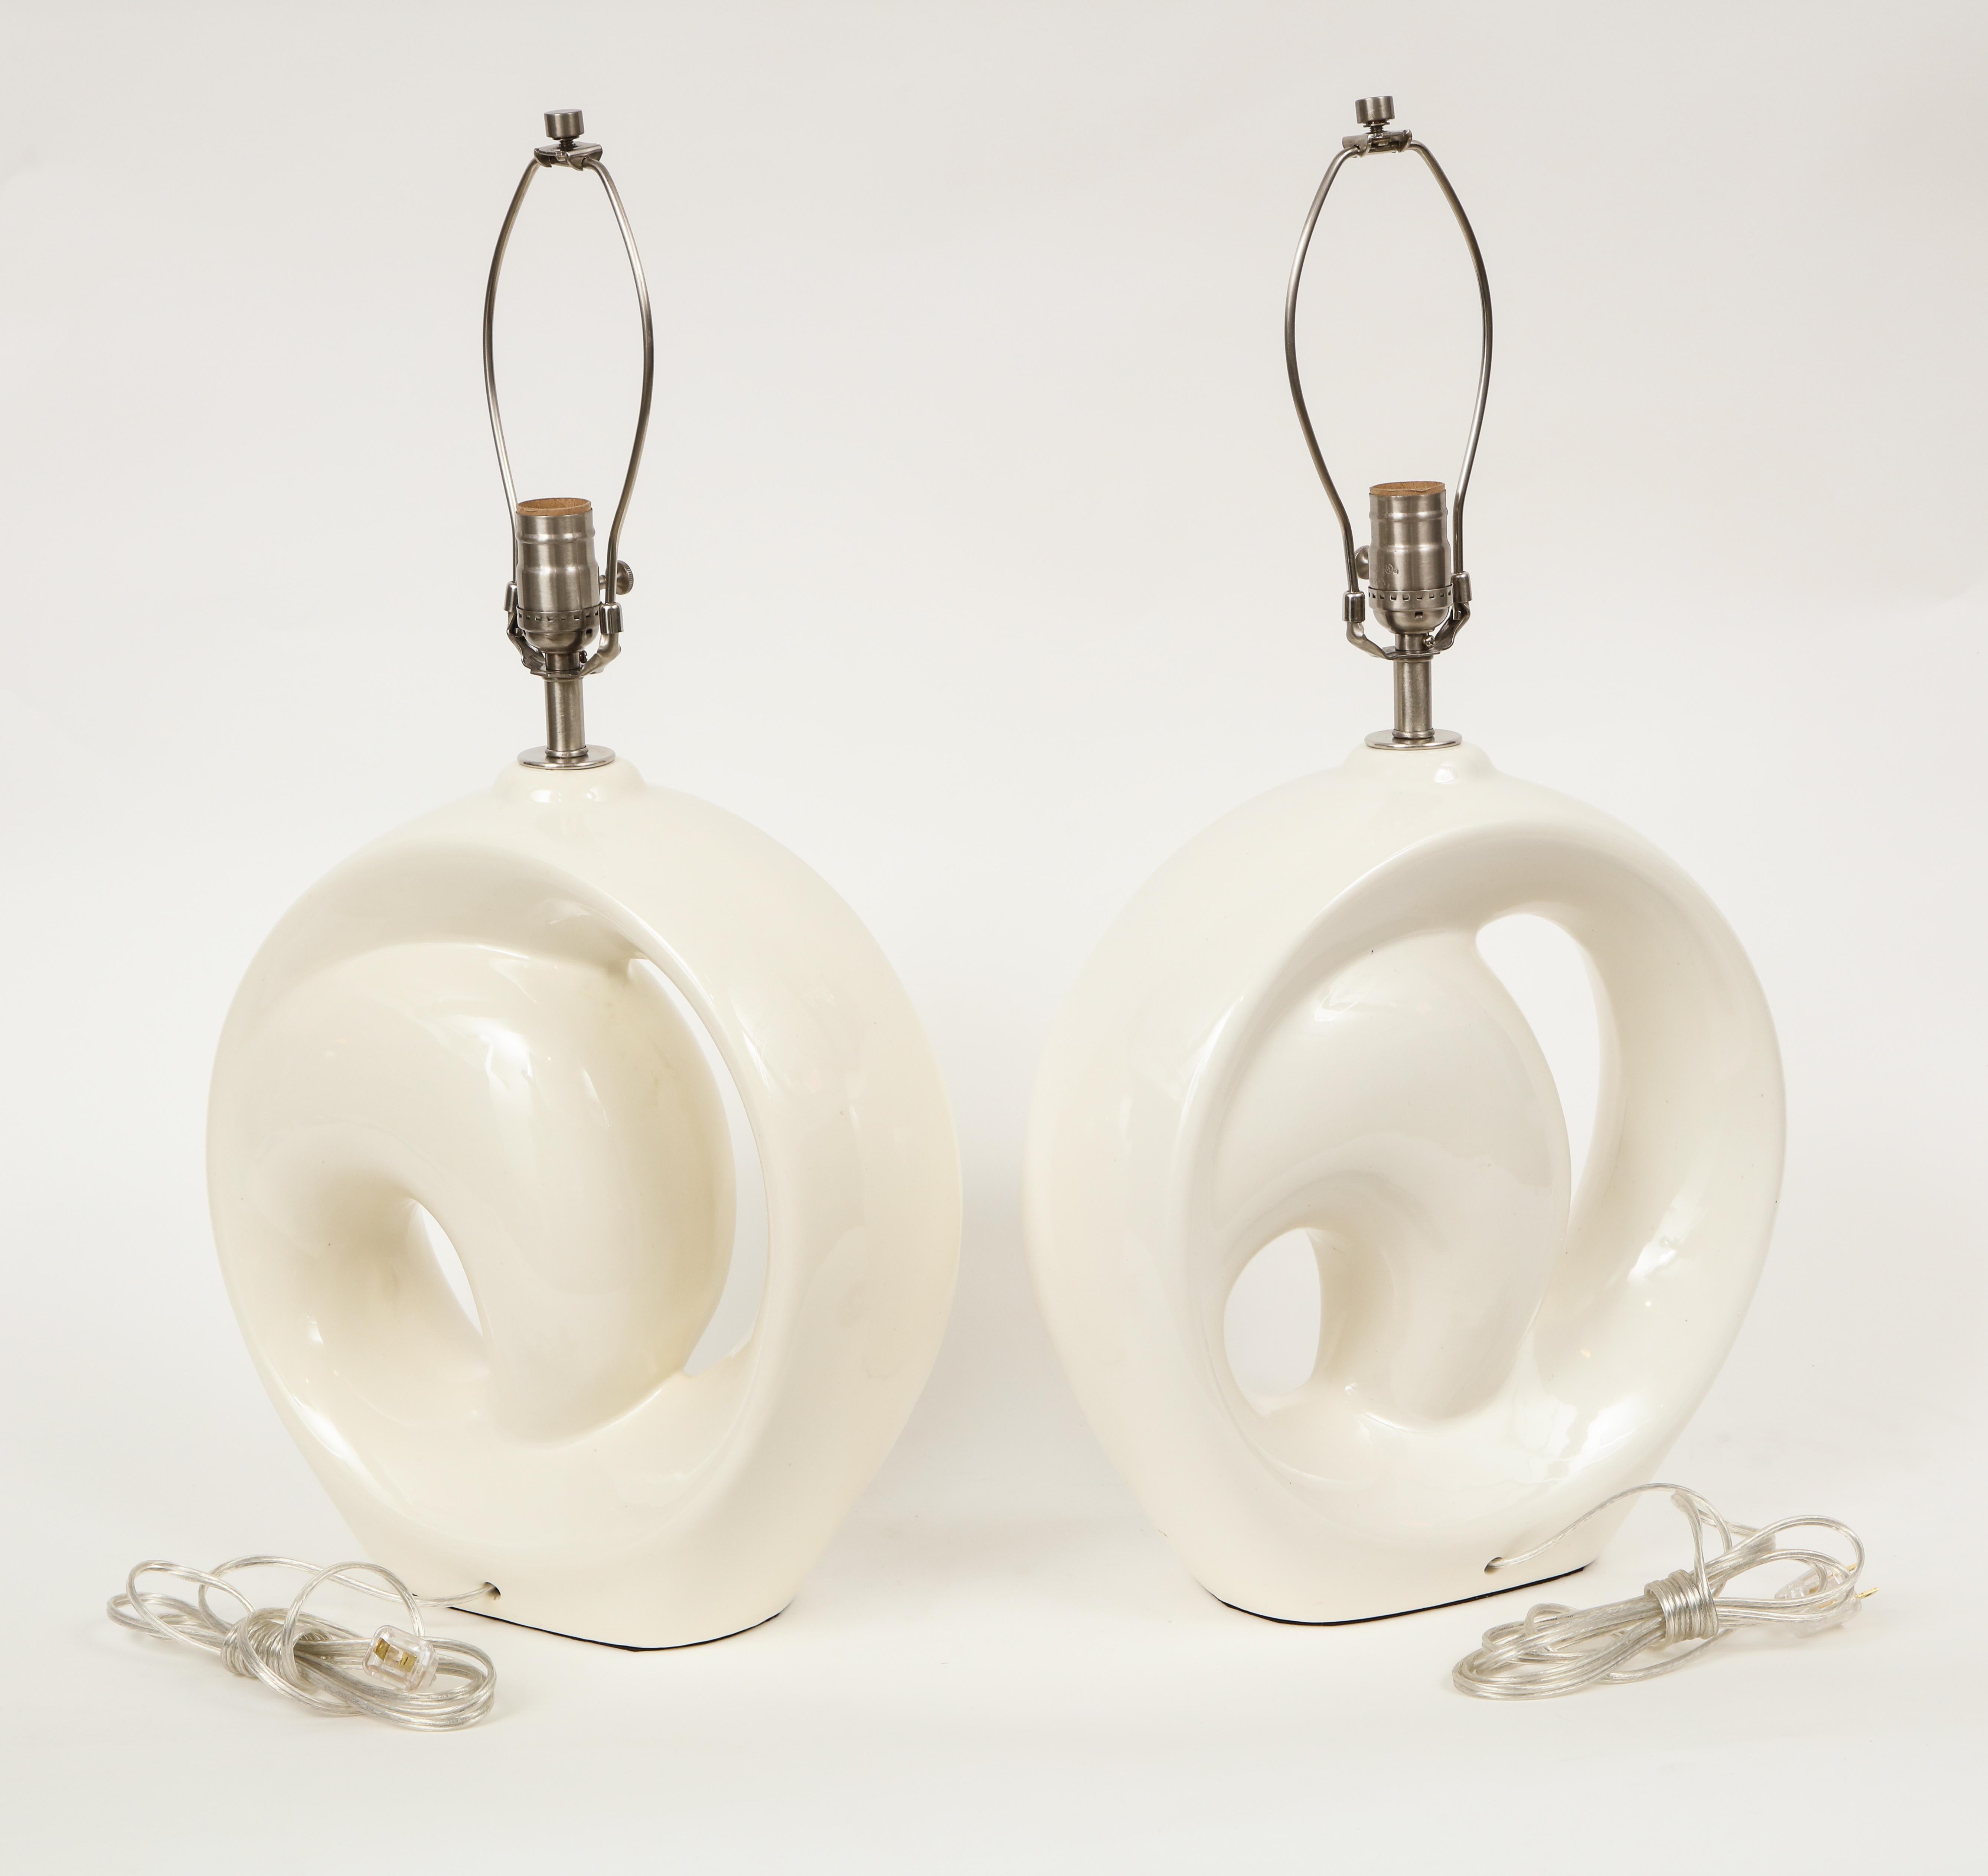 Pair of modernist porcelain lamps featuring a milky white glaze, and nickel hardware. Rewired for use in the USA. 100W bulb max.